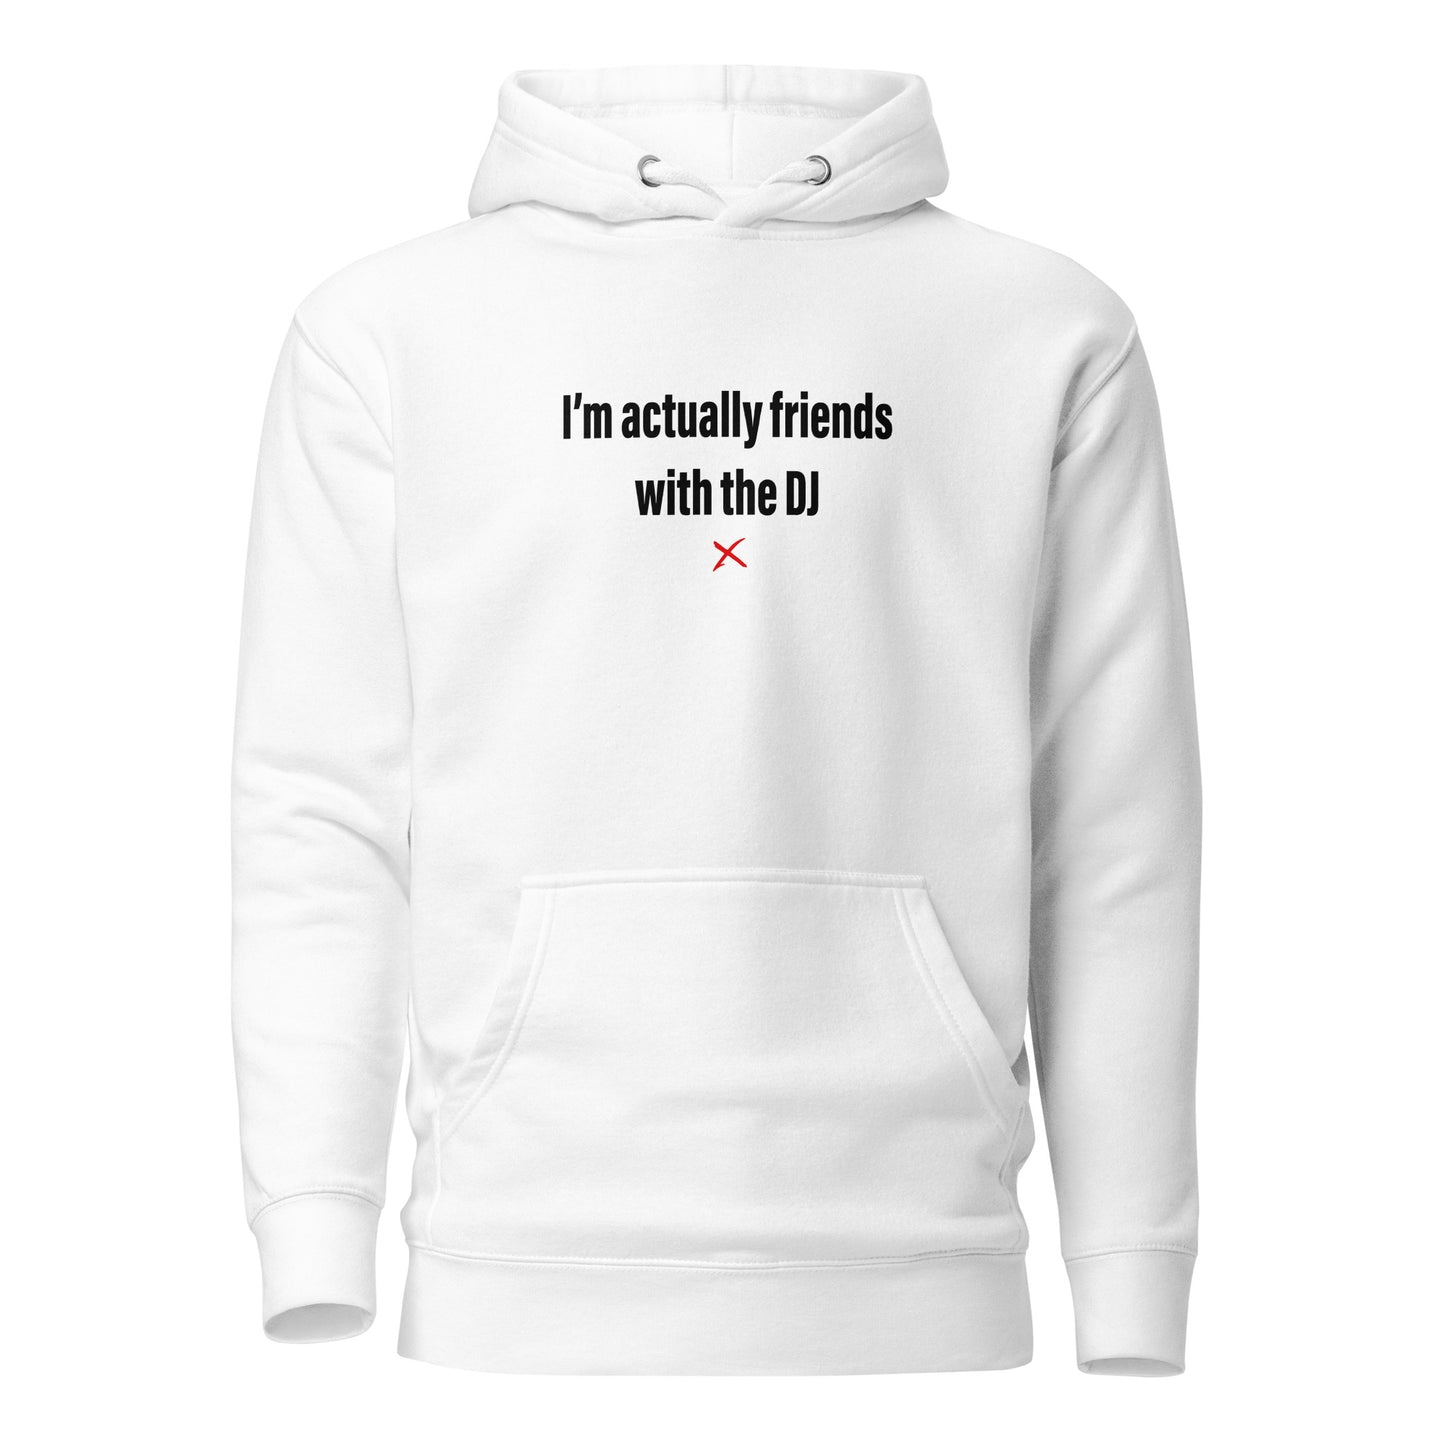 I'm actually friends with the DJ - Hoodie